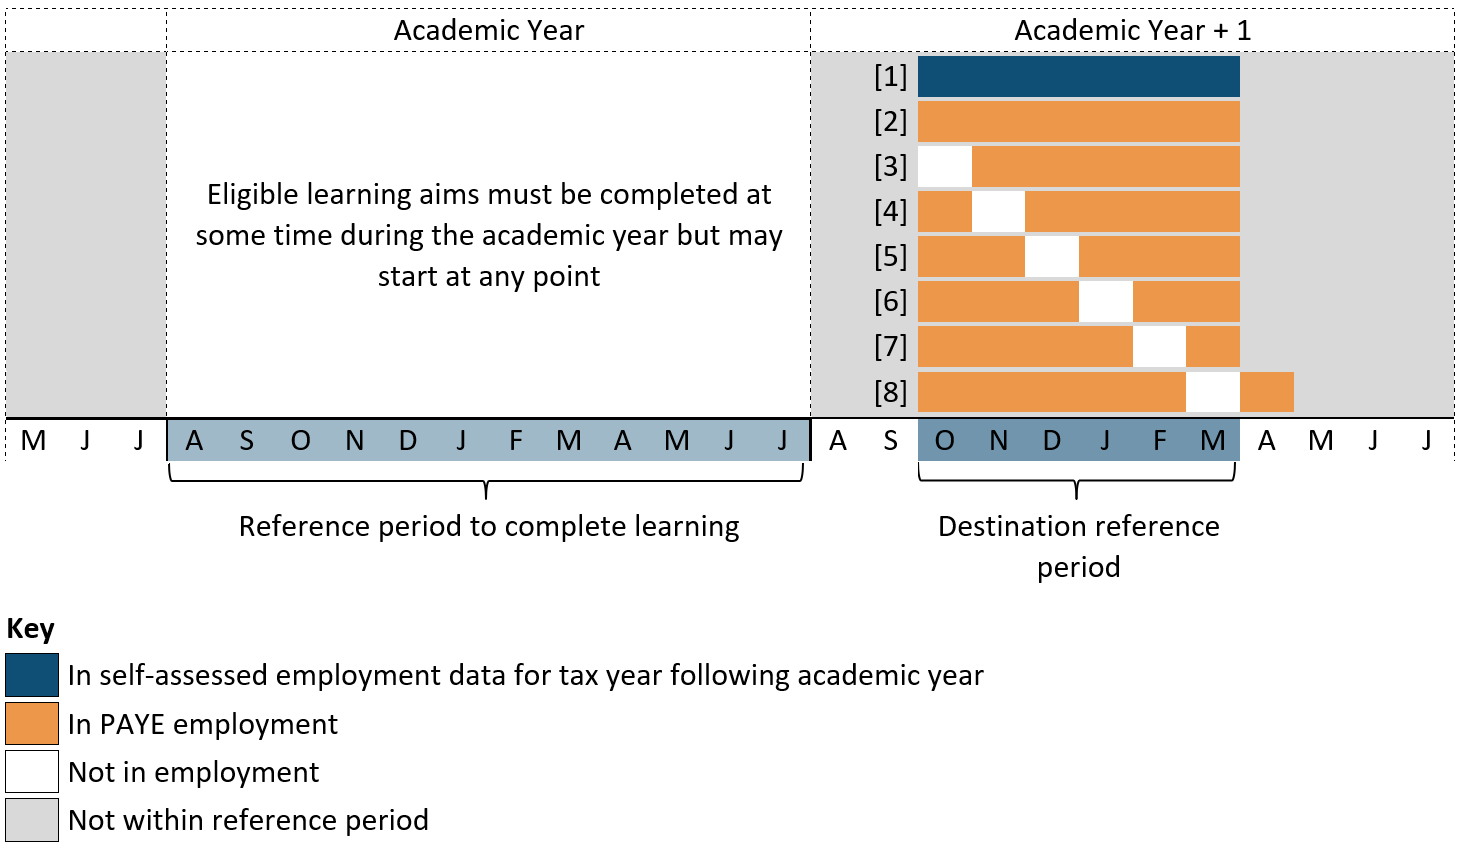 Timeline showing the August to July academic year for achievement, and subsequent October to March destination reference period